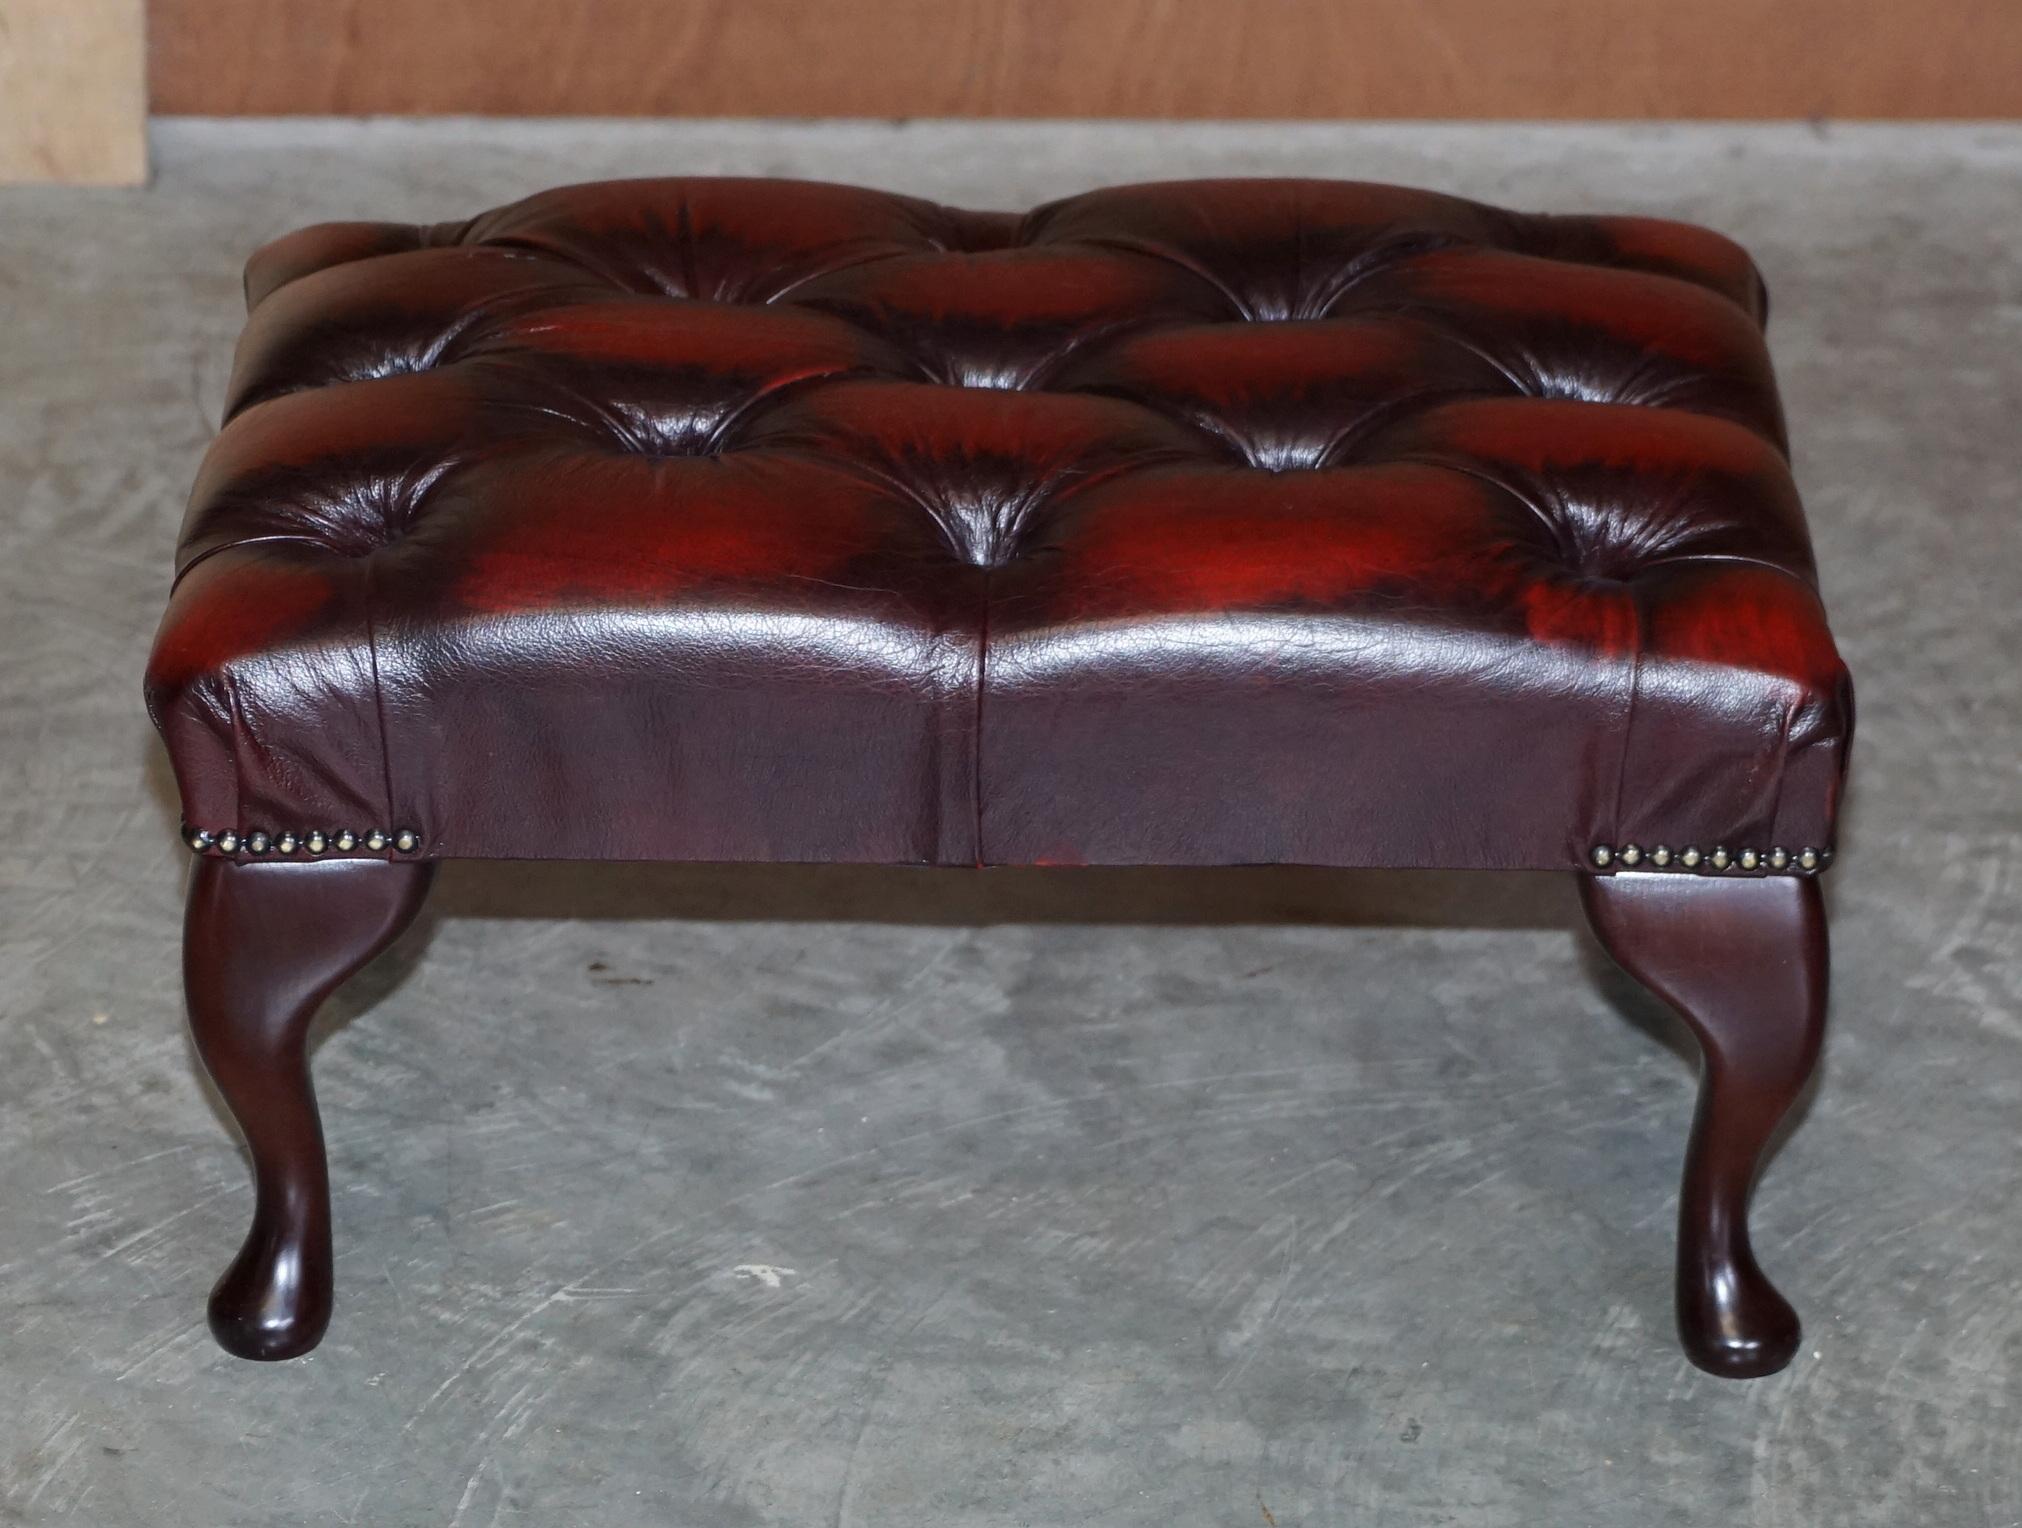 We are delighted to offer this nice vintage style Oxblood Leather Chesterfield footstool

A good looking well made and comfortable stool, it can be used for one or two pairs of feet, it has the original finish

Condition wise we have deep